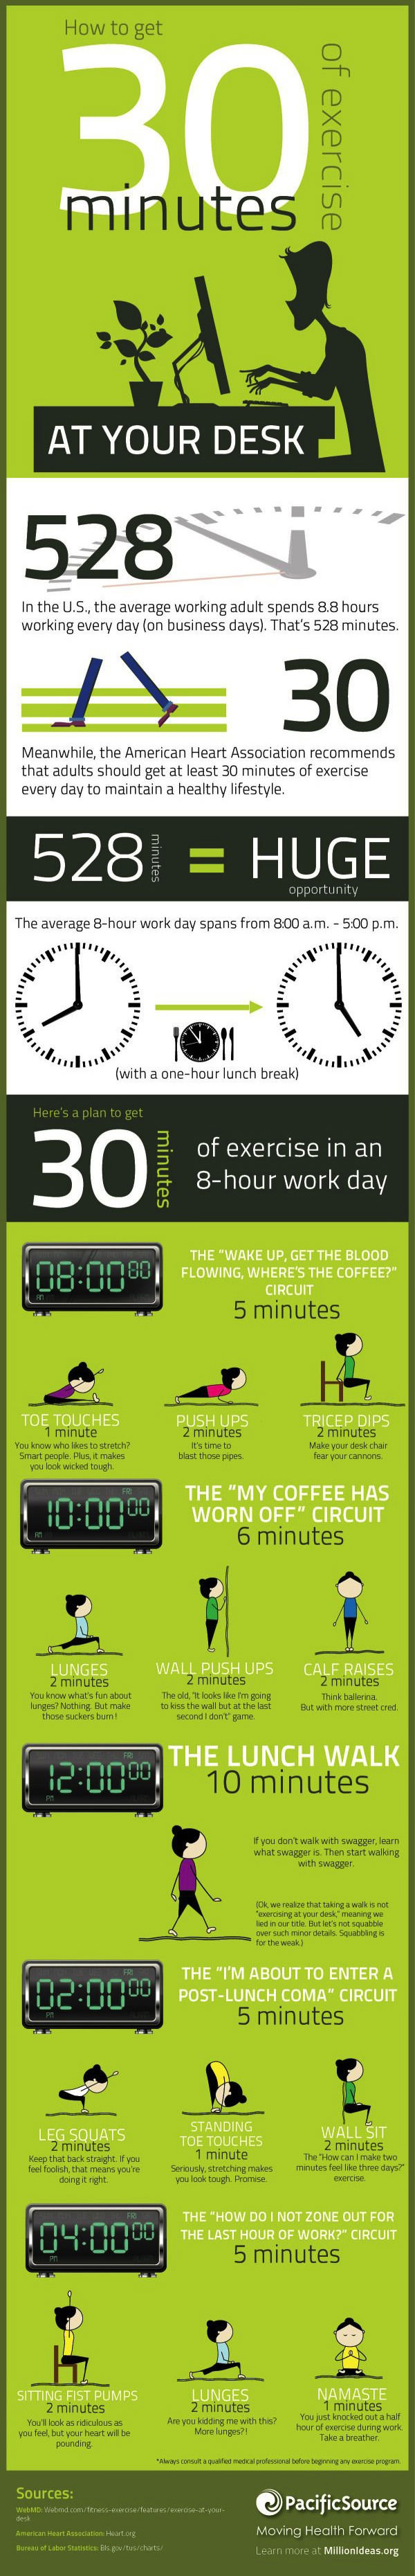 Fitness Stuff #442: 30 Minutes of Exercise at Your Desk